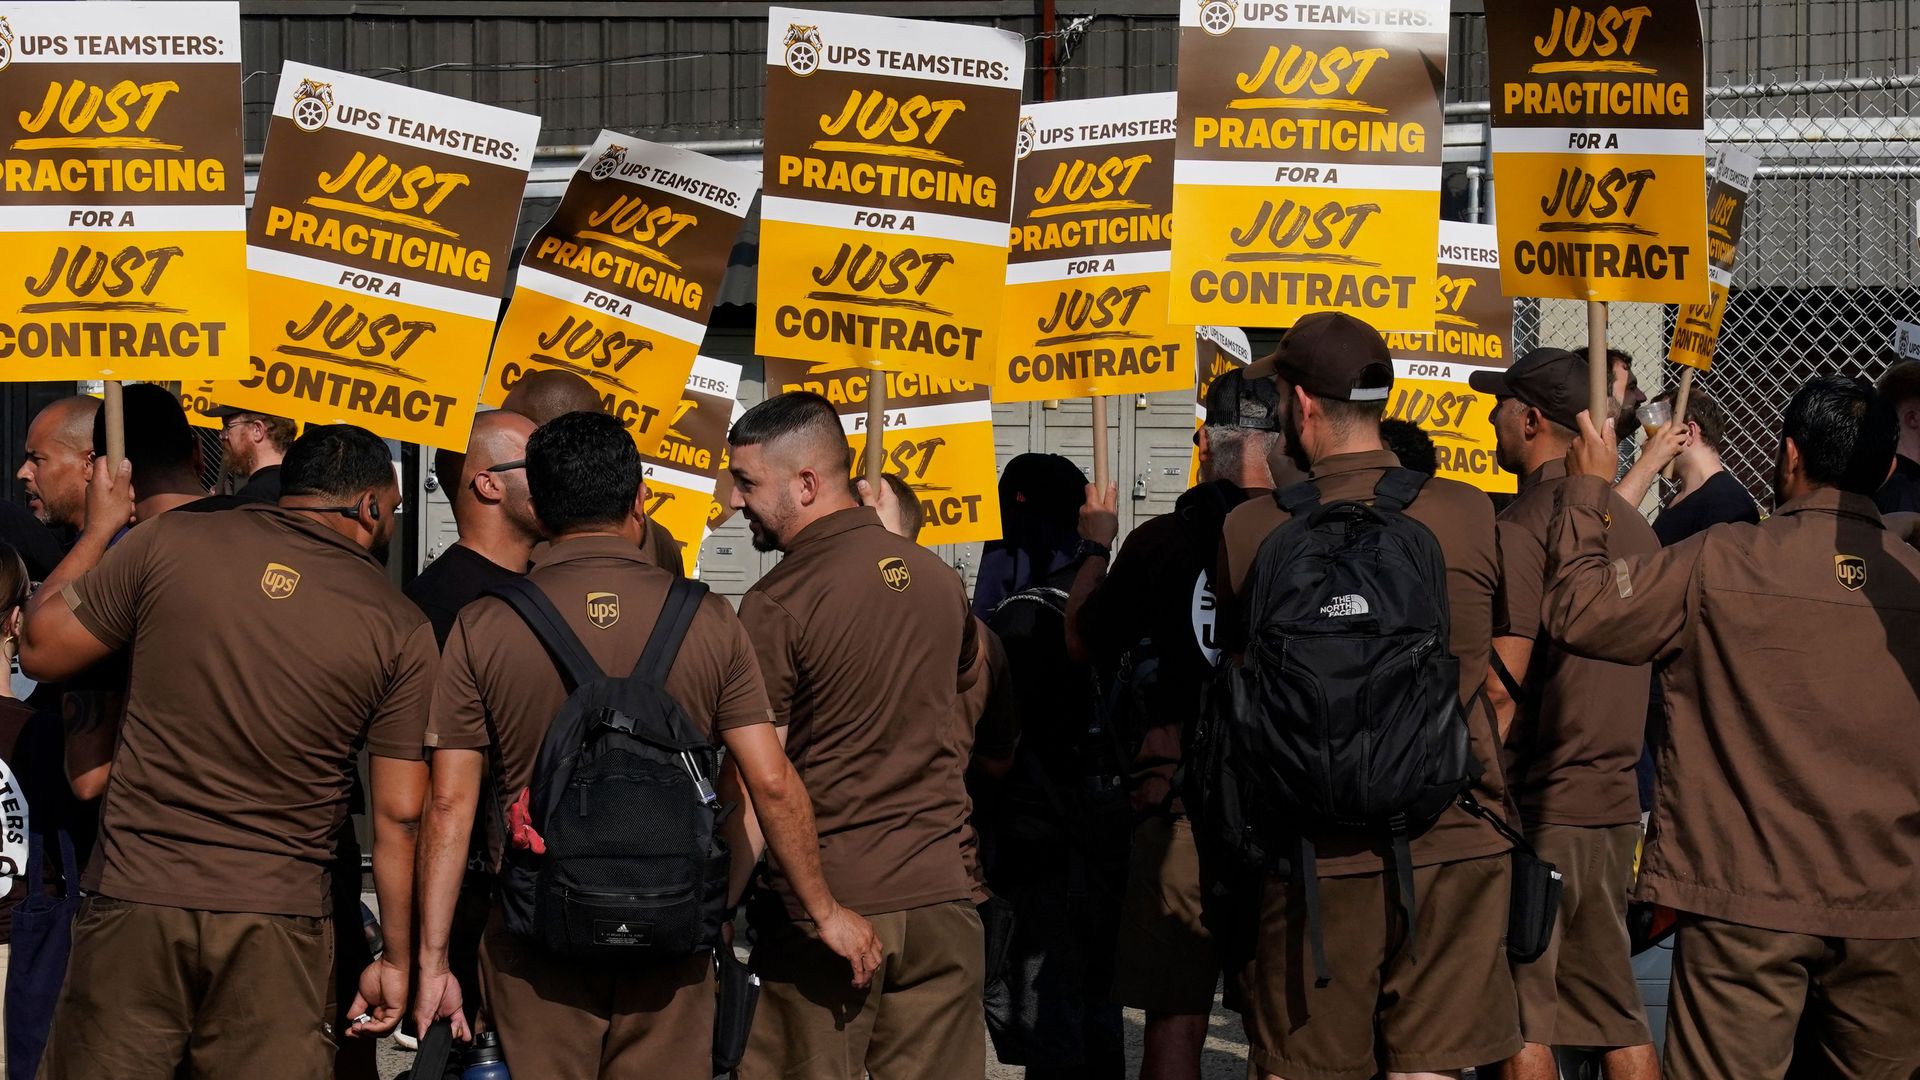 UPS workers walk a "practice picket line" in New York City earlier this month.